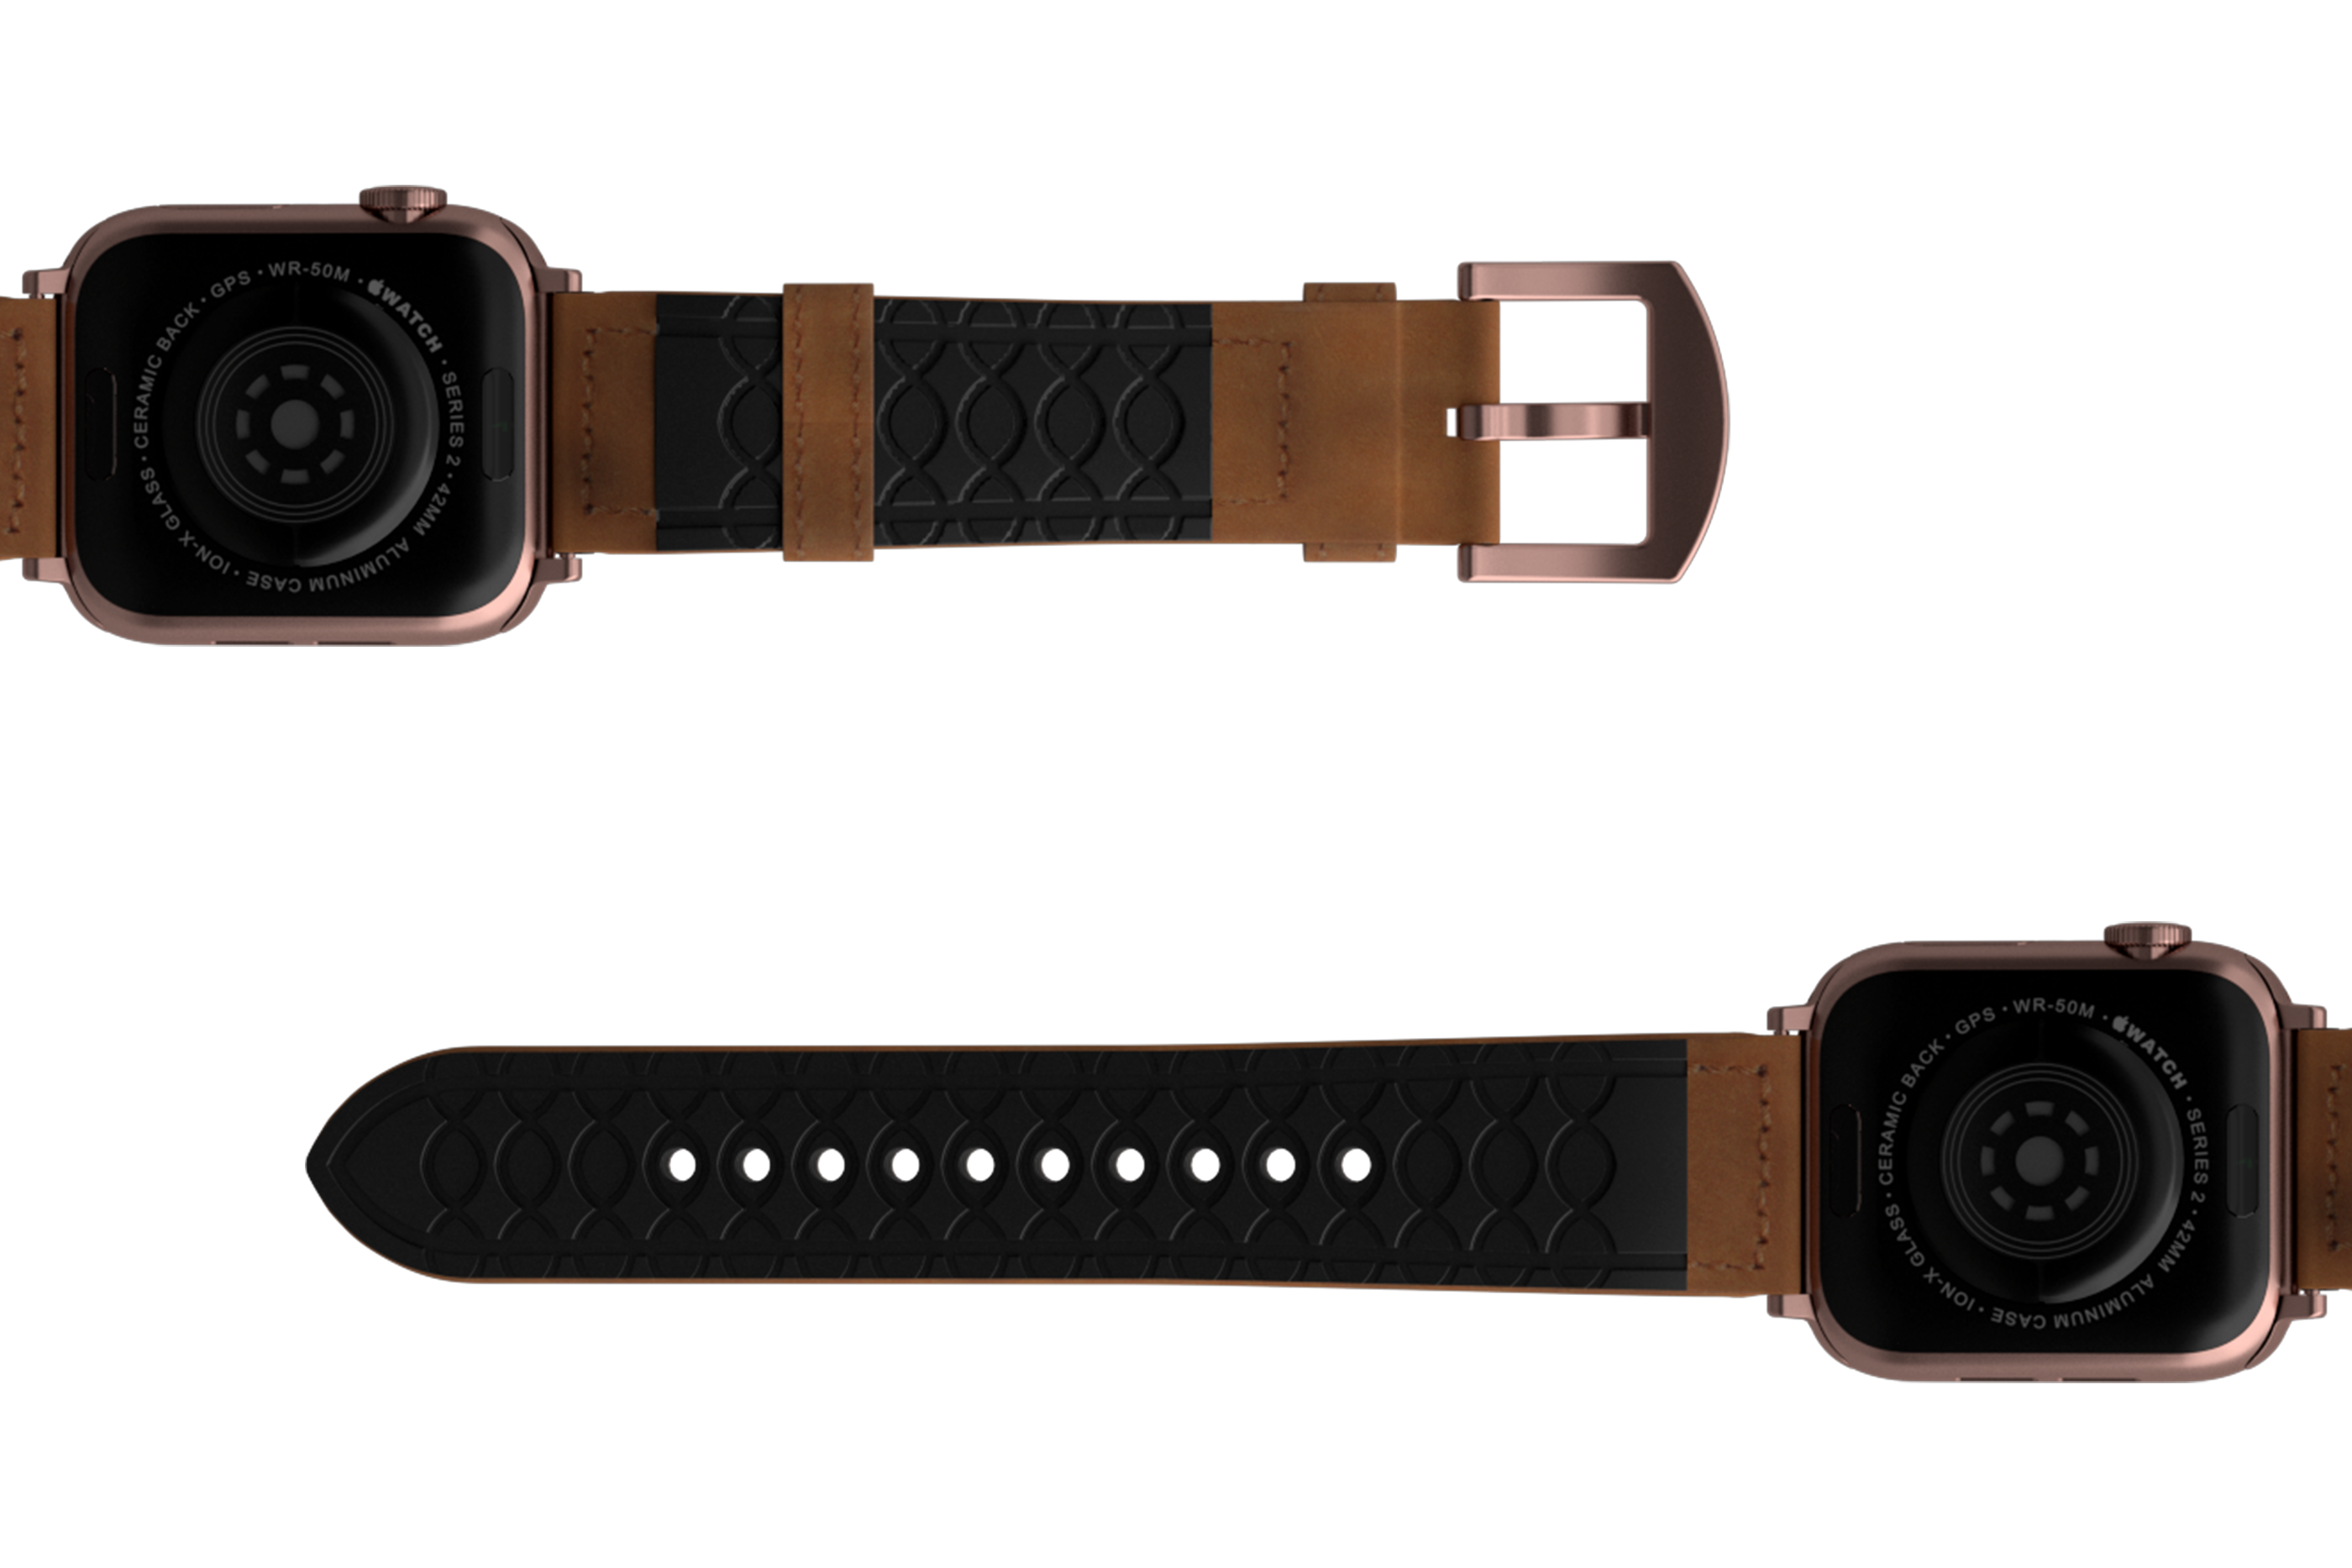 Vulcan Trek Leather Apple watch band  with rose gold hardware viewed bottom up